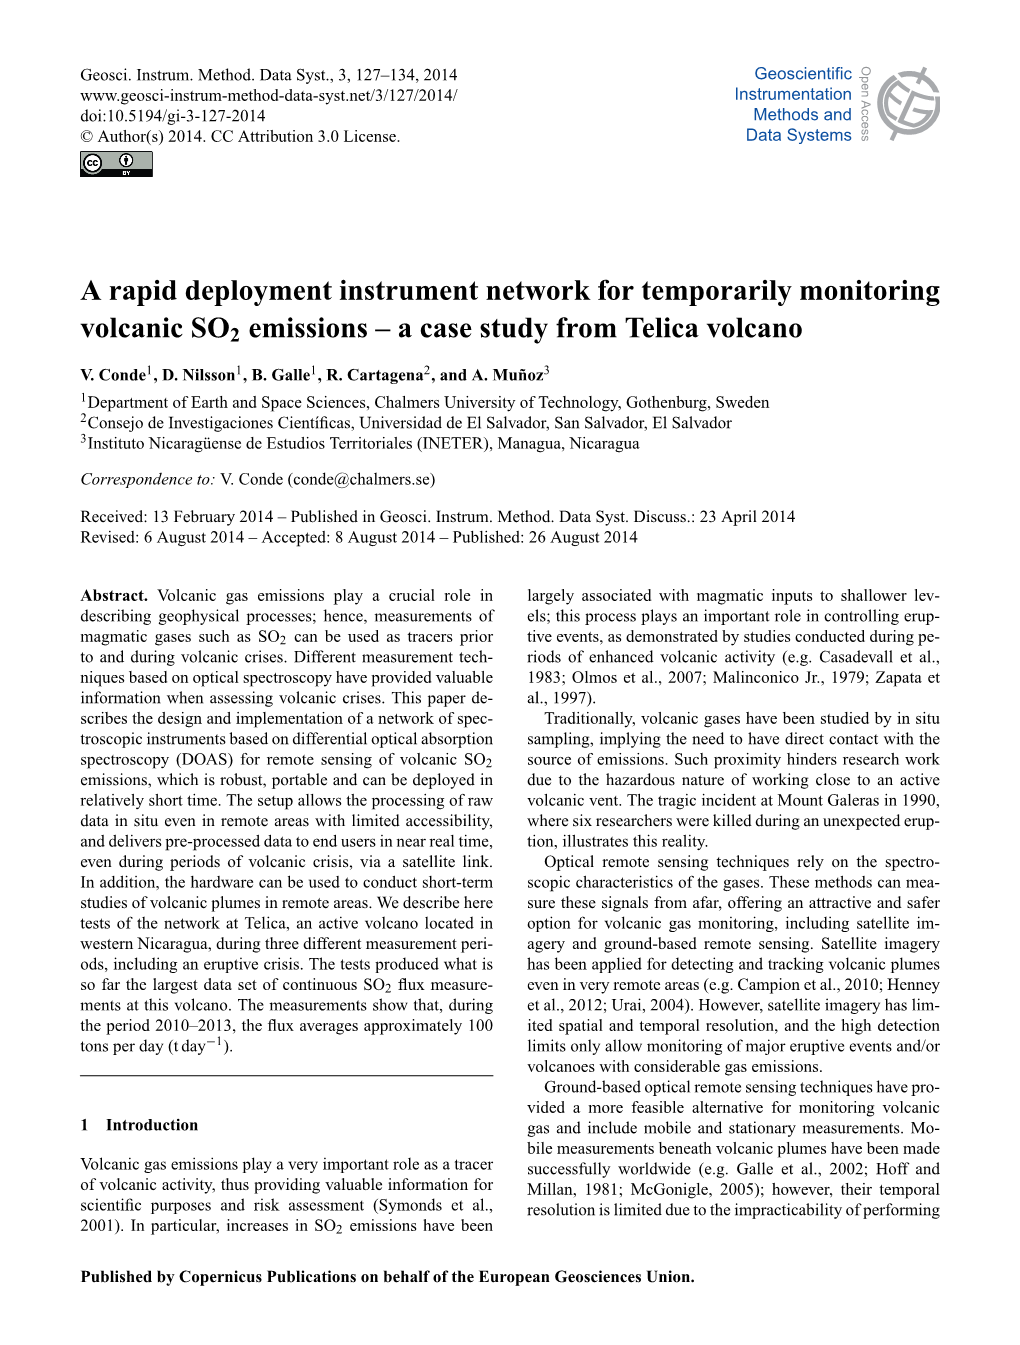 A Rapid Deployment Instrument Network for Temporarily Monitoring Volcanic SO2 Emissions – a Case Study from Telica Volcano